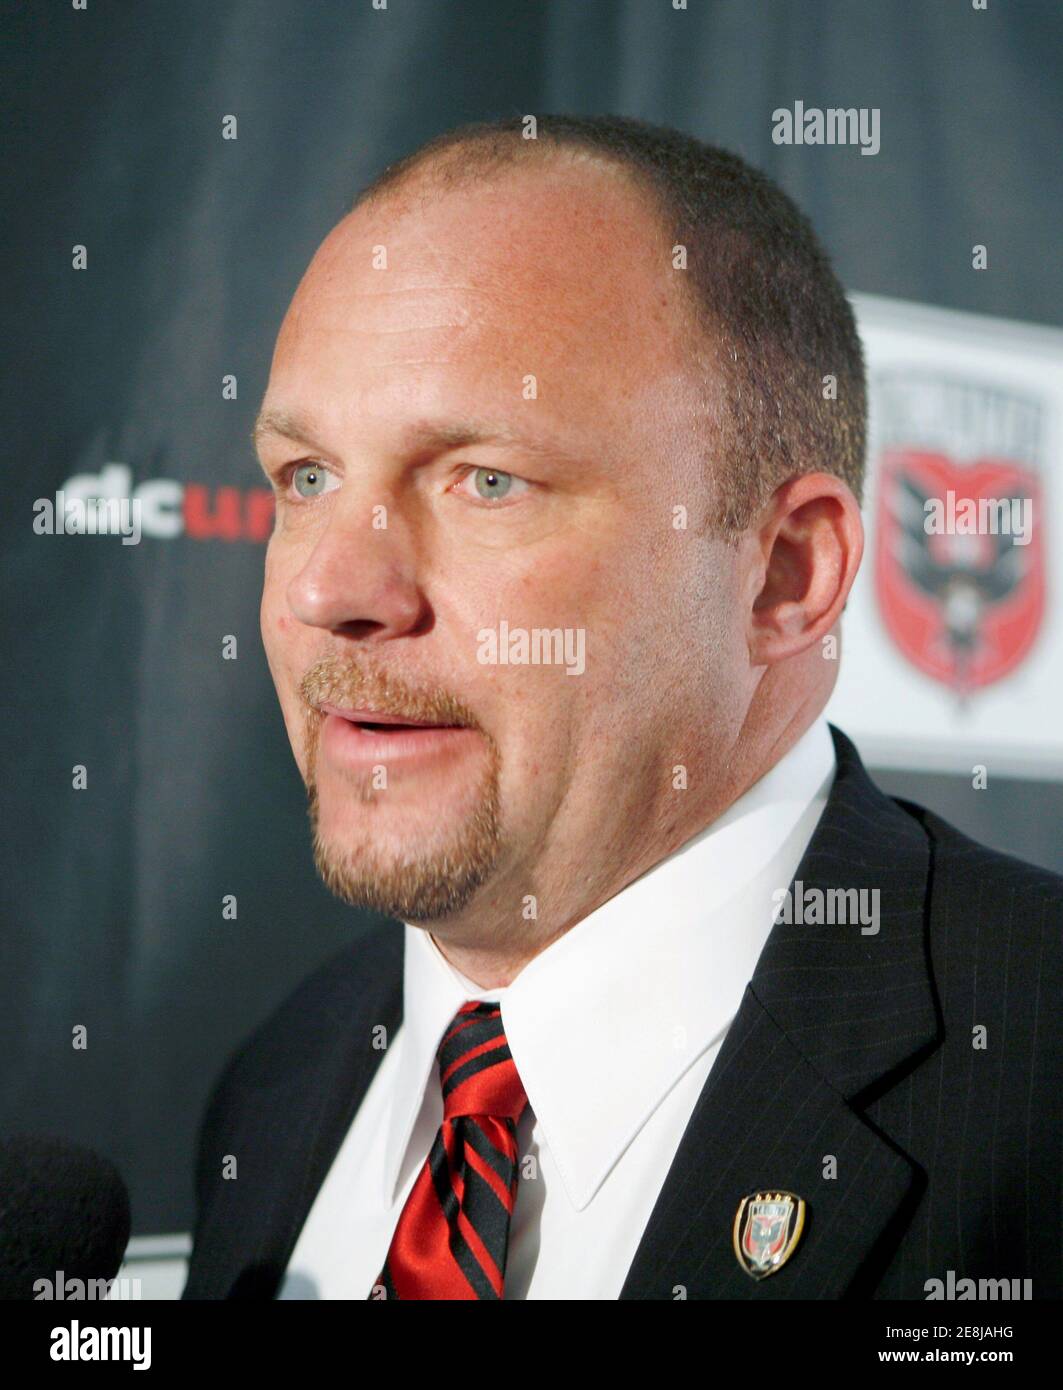 Tom Soehn speaks after he was named the new coach at D.C. United in Washington December 21, 2006, replacing Peter Nowak, who left the Major League Soccer club to become an assistant under U.S. national team interim coach Bob Bradley. REUTERS/Steve Ginsburg (UNITED STATES) Stock Photo